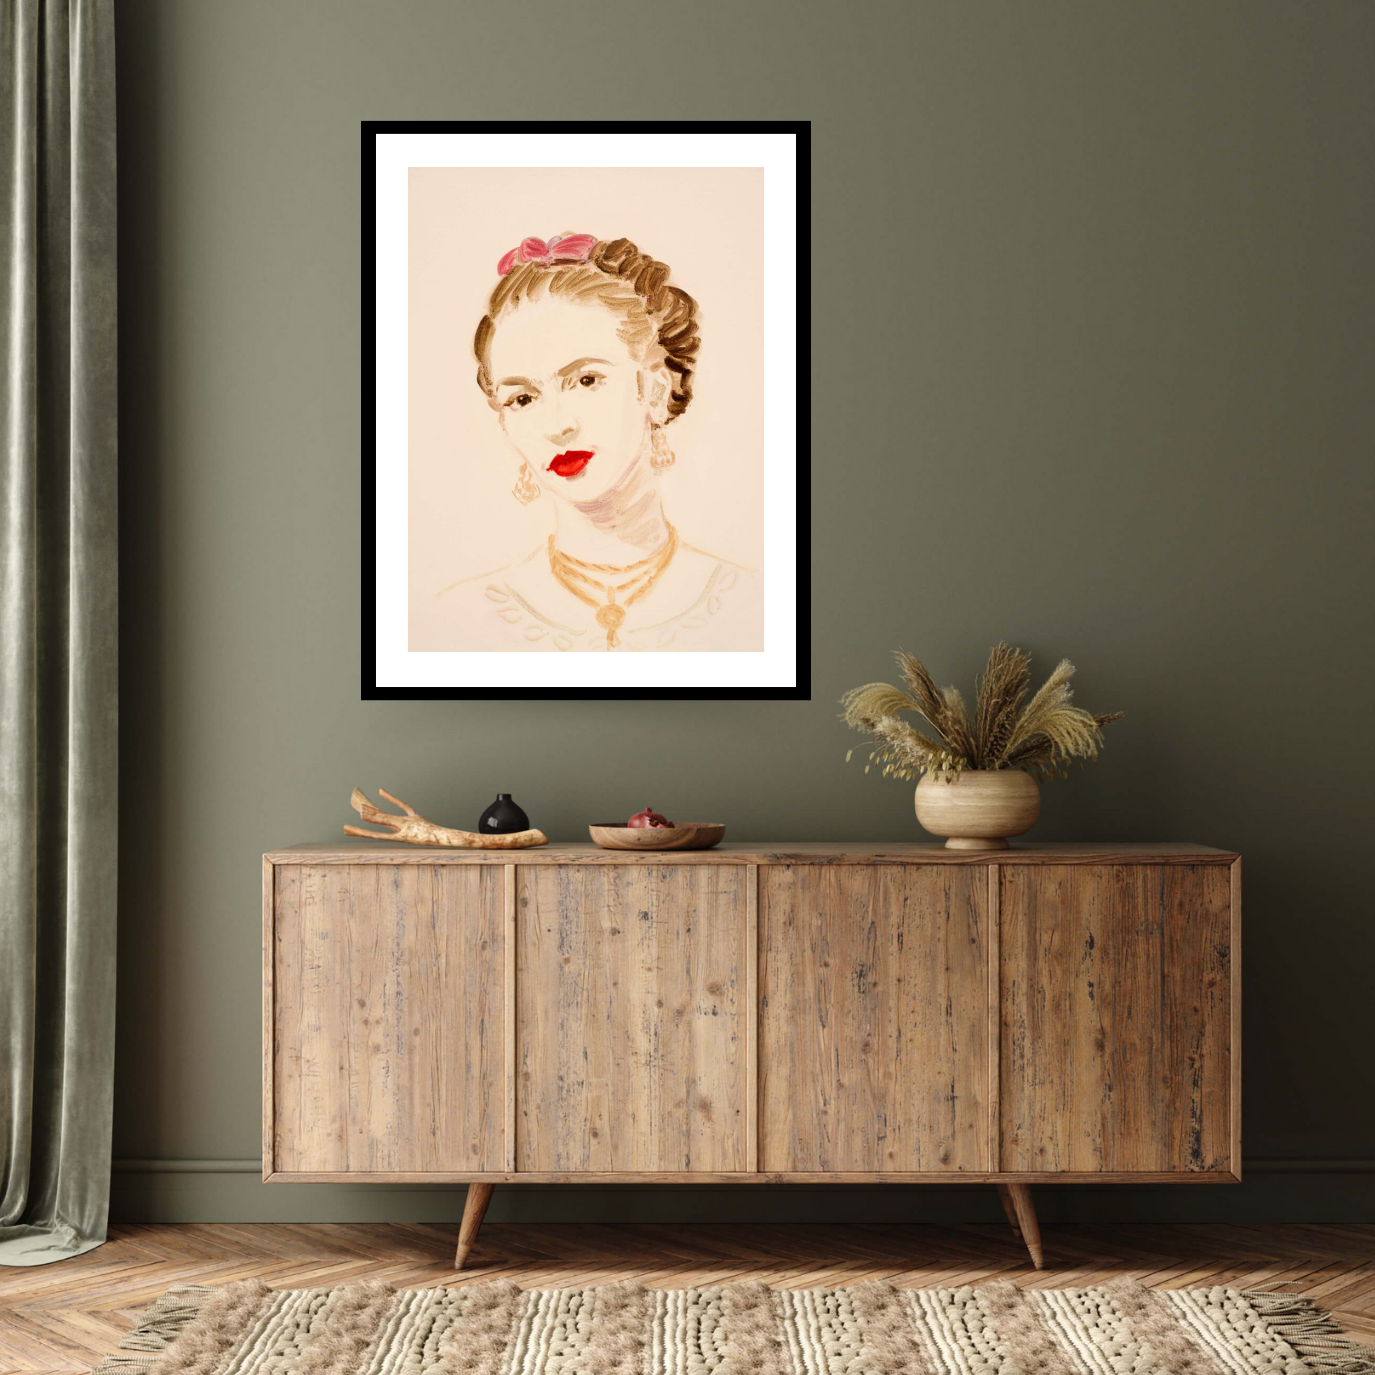 Image of the black framed print ‘Frida Kahlo’ by Annie Kevans, depicting the mexican artists Frida kahlo with her characteristic bright red lipstick